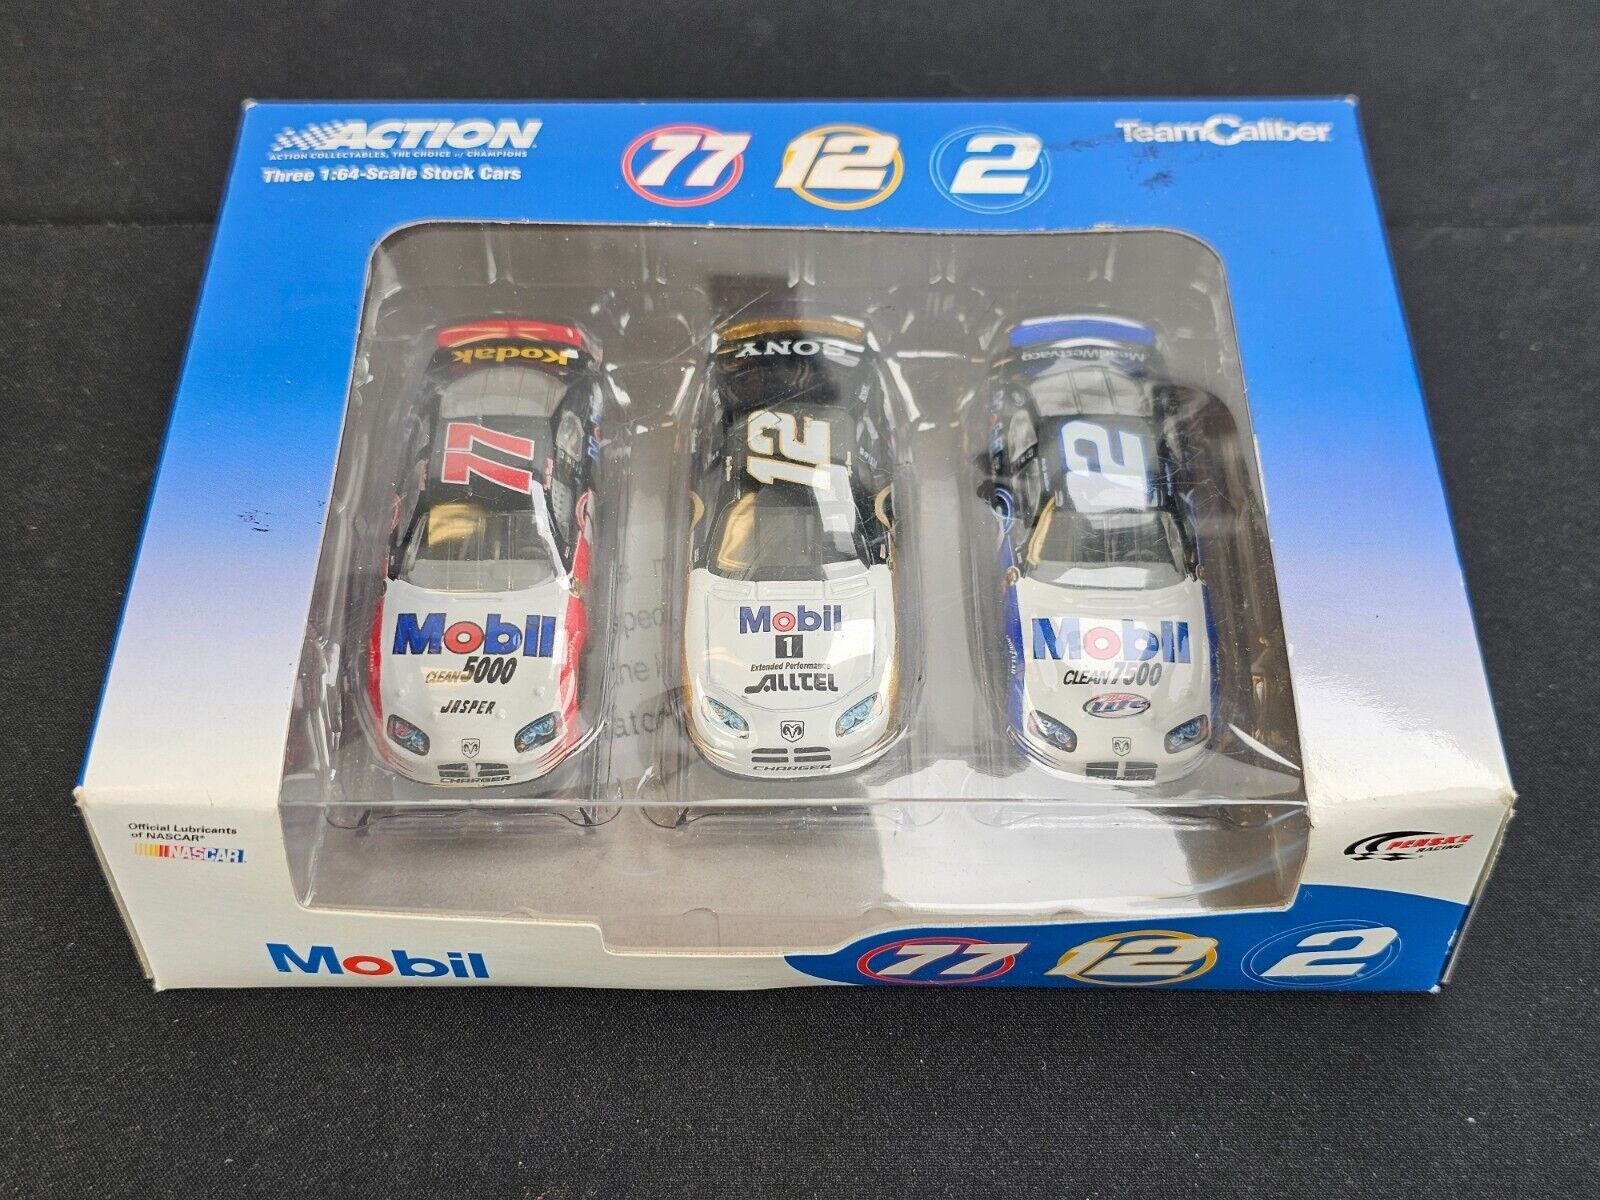 Primary image for Action Team Caliber Mobil Stock Cars/ NASCAR 1:64 scale Die Cast Number 77-12-2